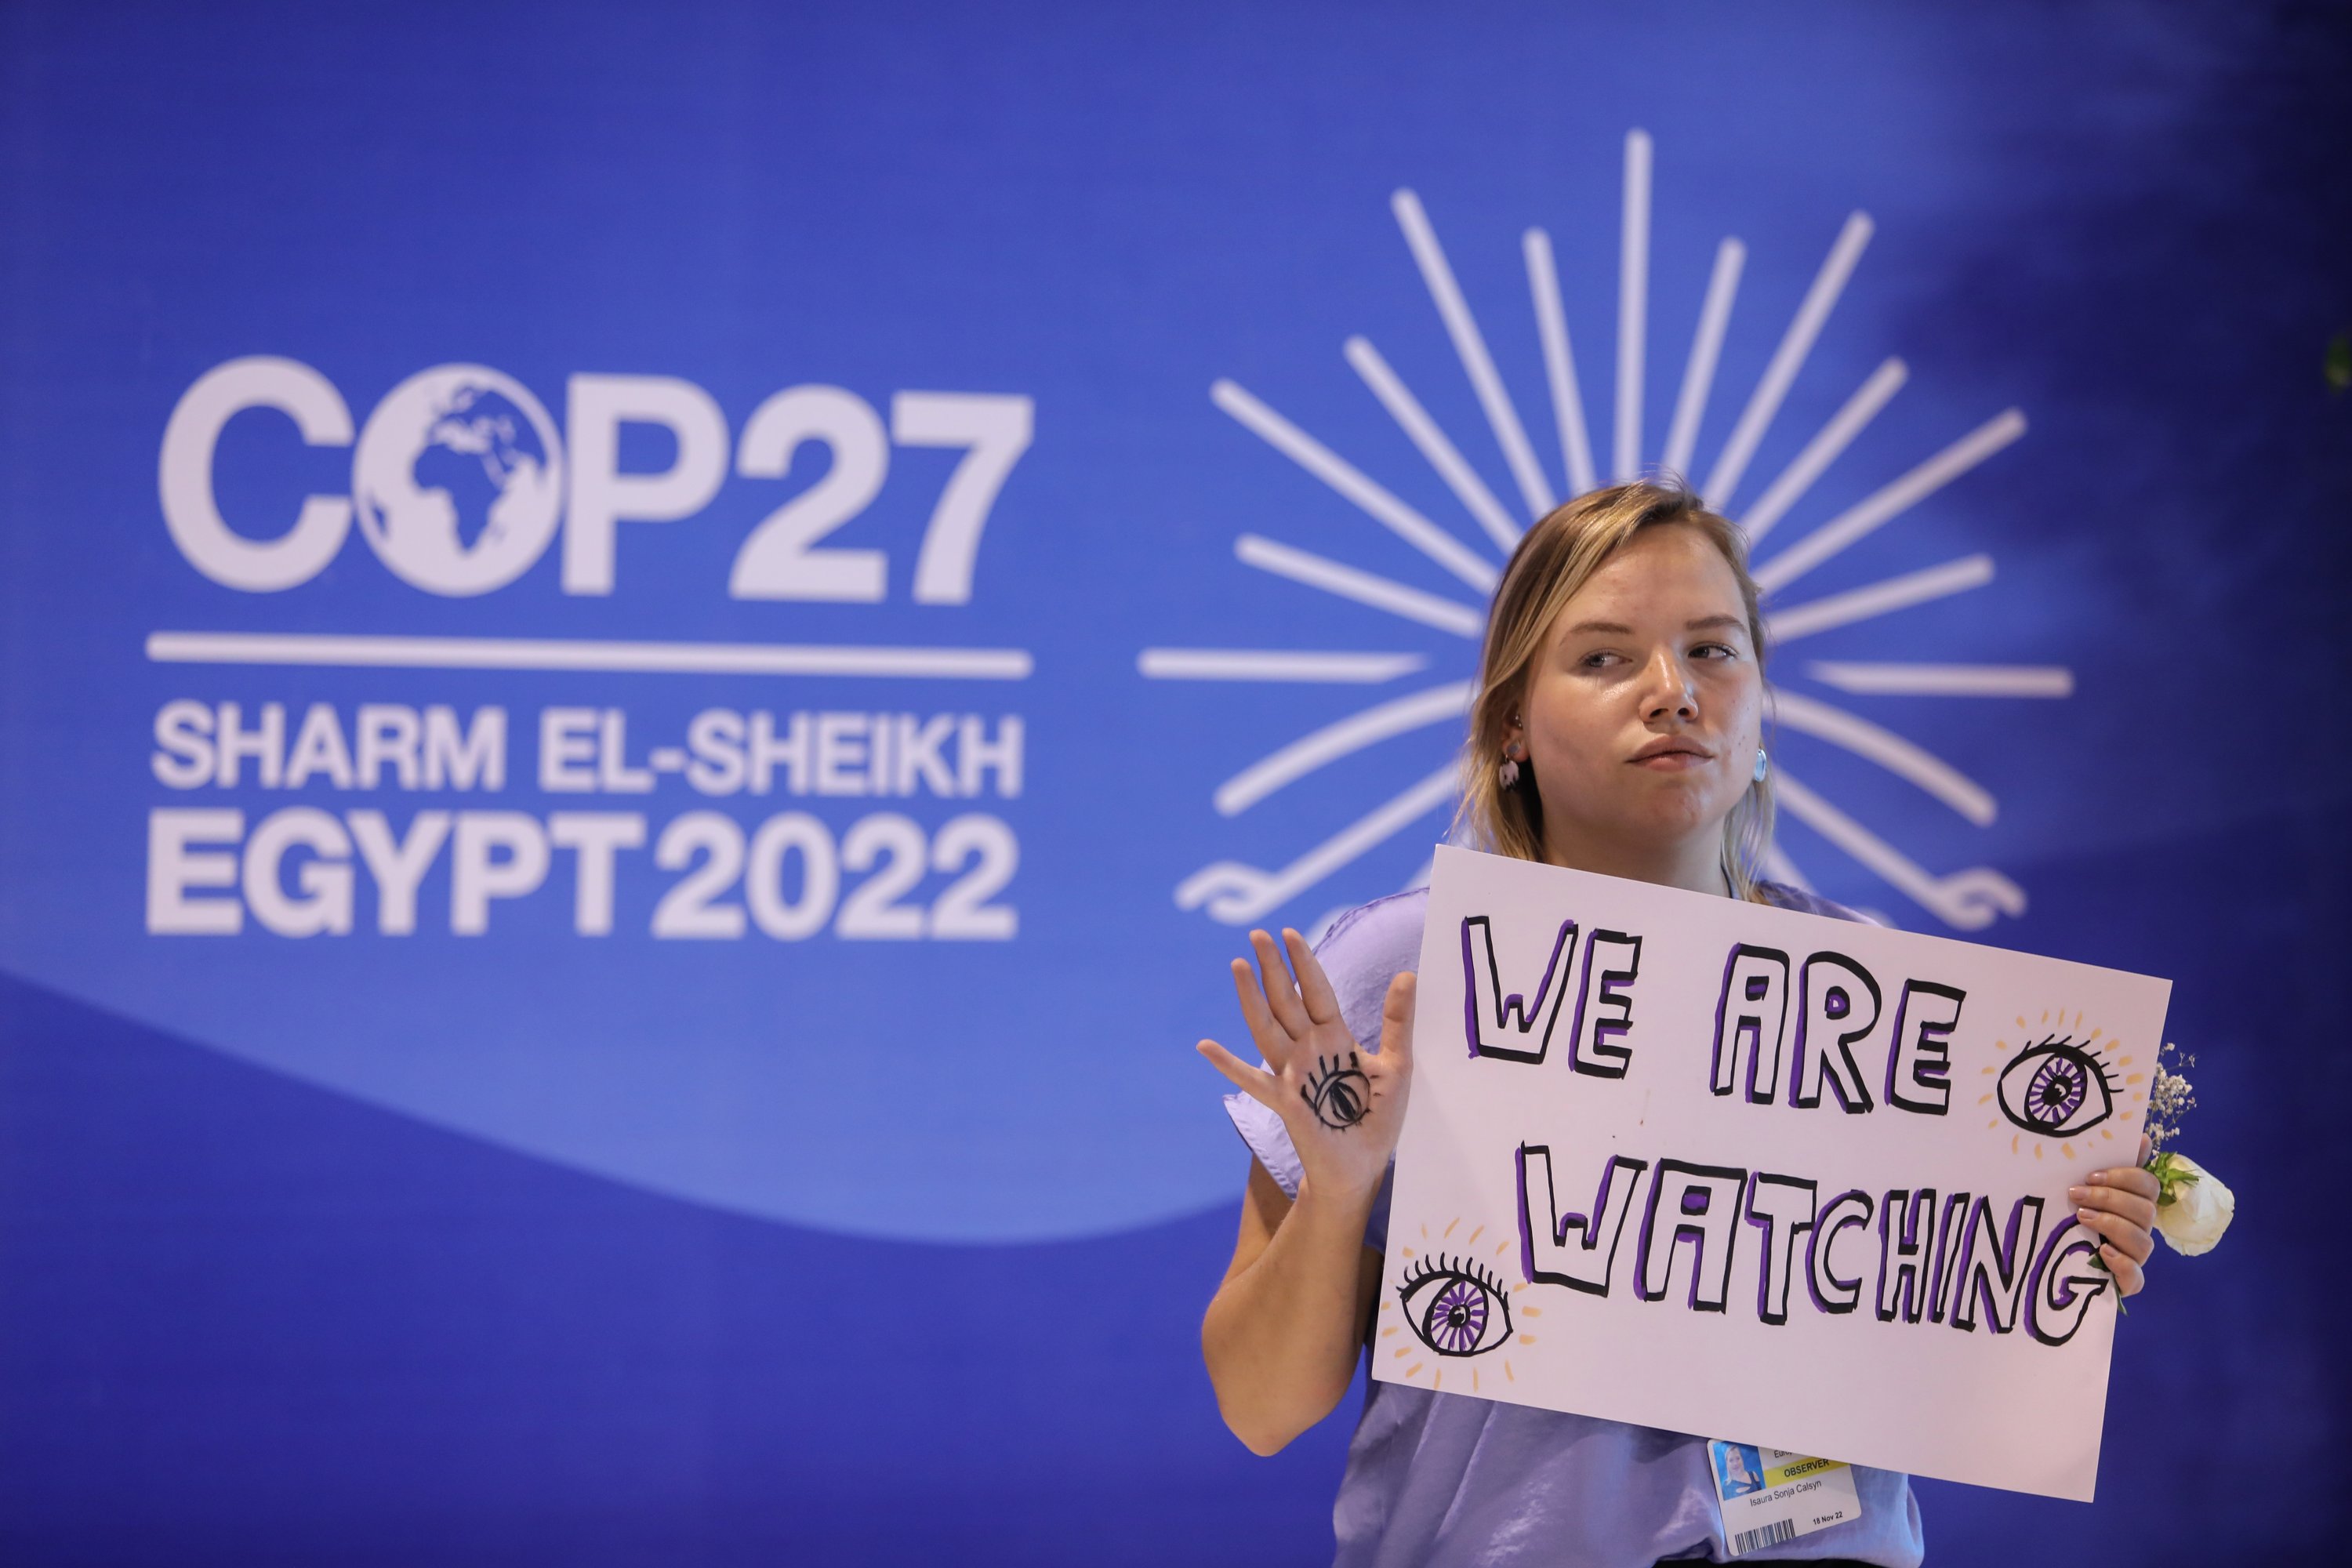 An activist holds a sign at the COP27 summit in Sharm El-Sheikh, Egypt, Nov. 19, 2022. (AA Photo)